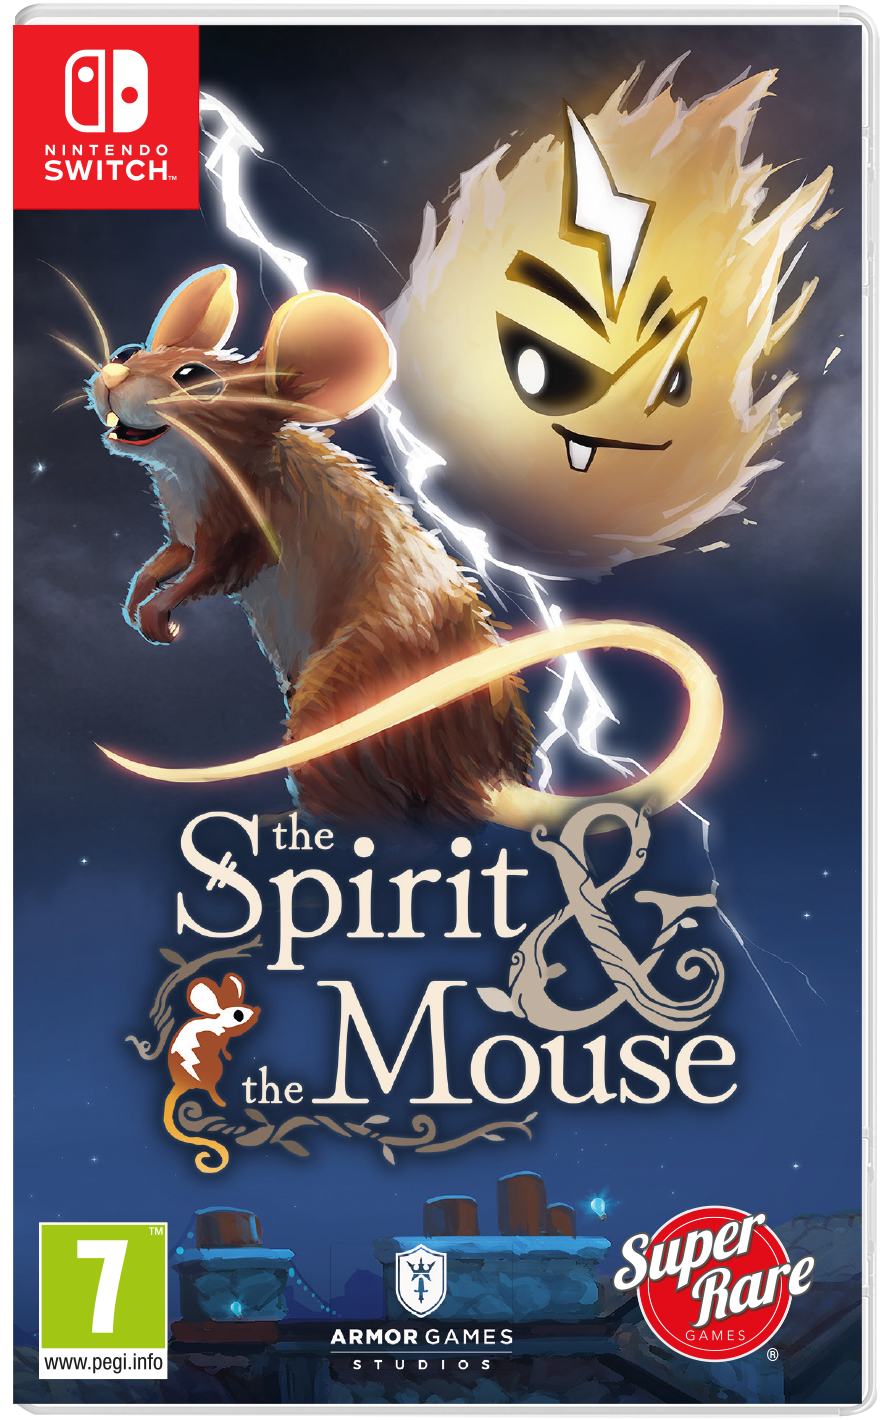 srg-89-spirit-the-mouse-switch-super-rare-games